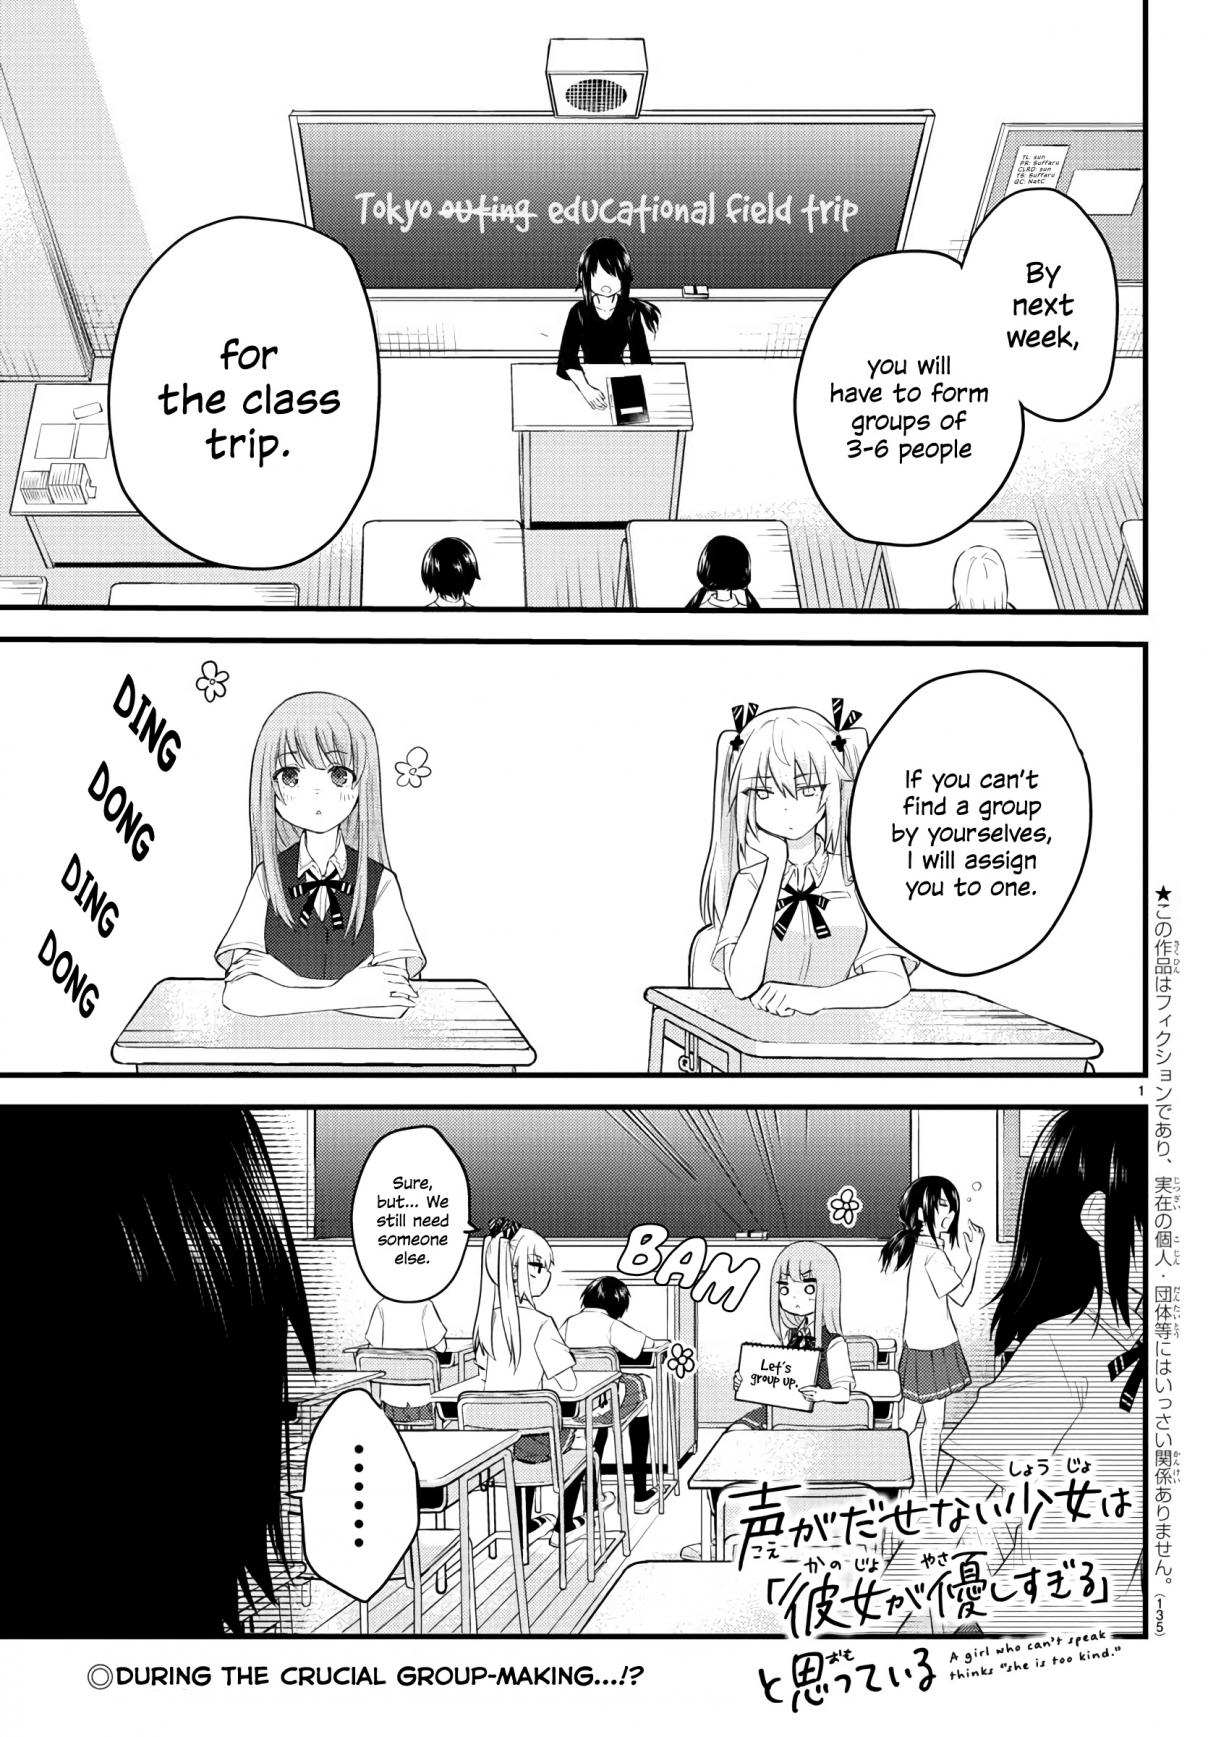 The Mute Girl and Her New Friend Vol. 1 Ch. 9 The Straightforward Duo